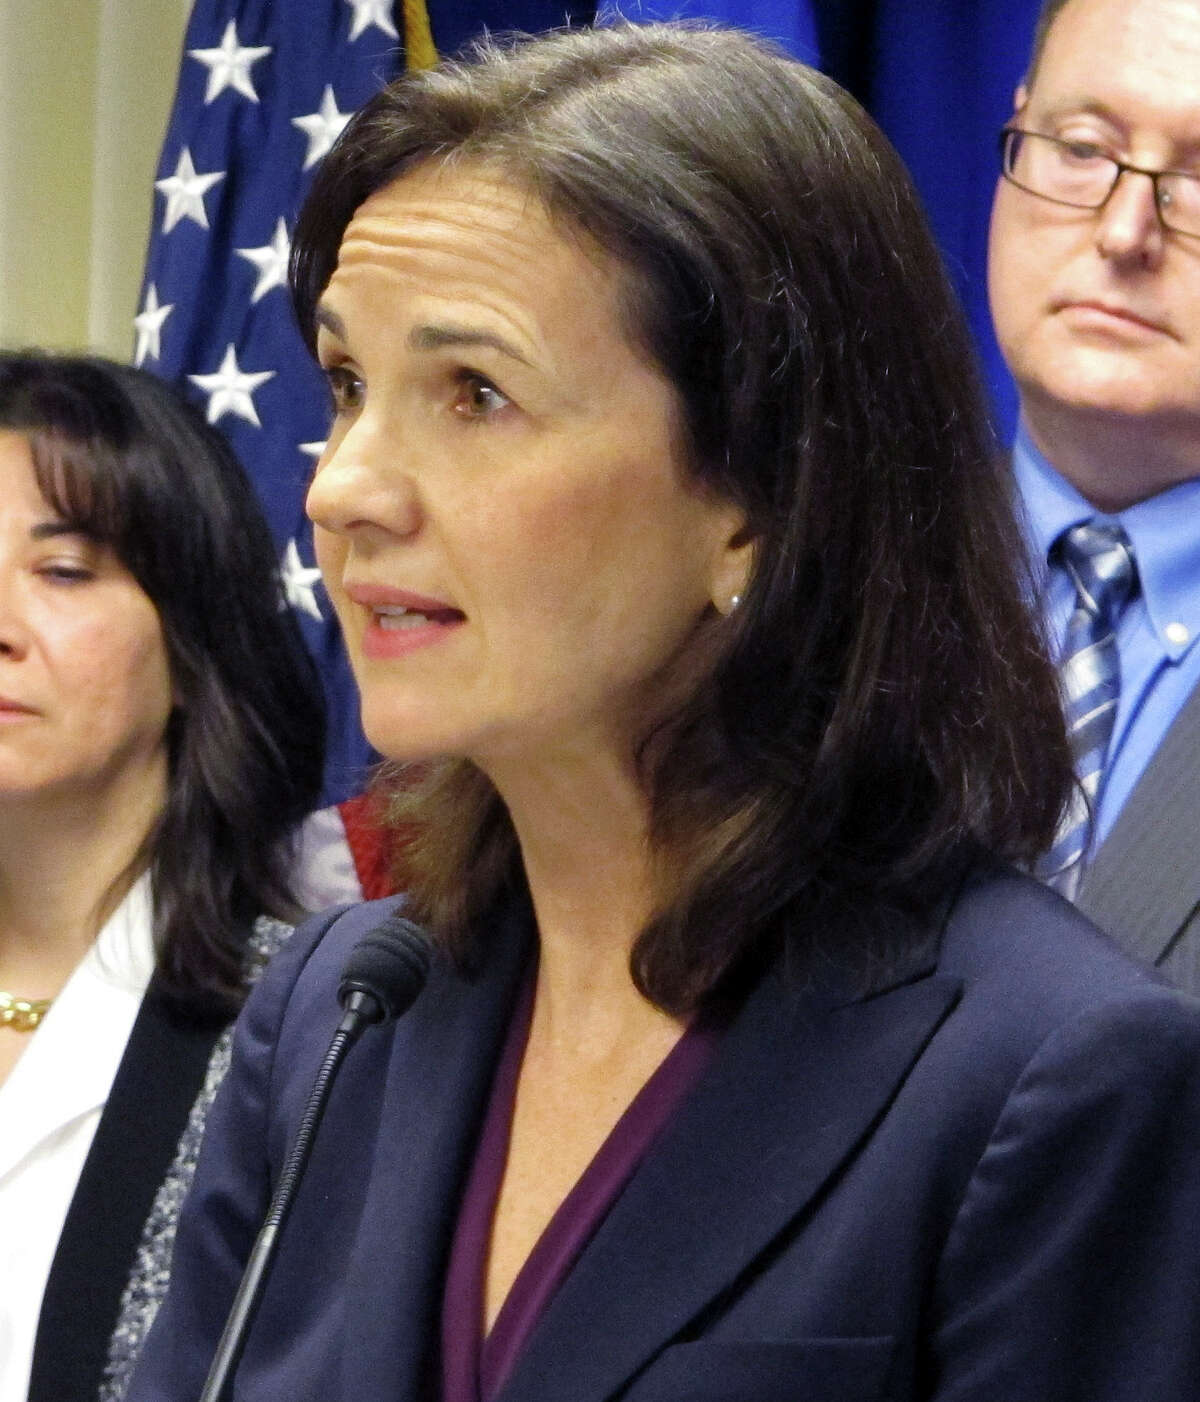 U.S. Attorney Deirdre Daly in February 2015 in New Haven, Conn. (AP Photo/Dave Collins)